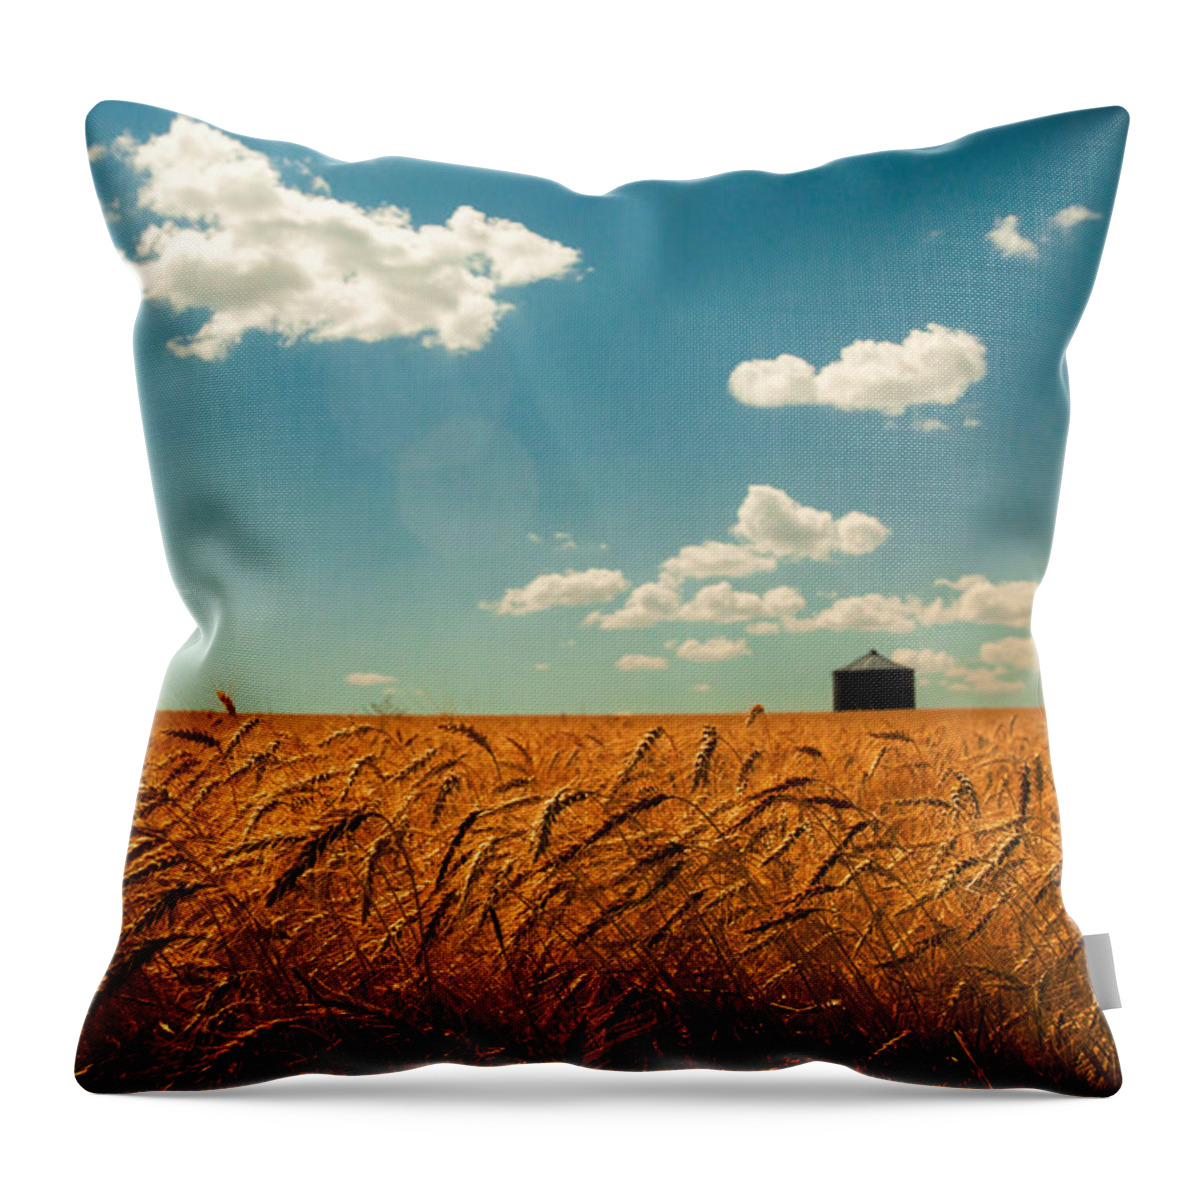 Landscape Throw Pillow featuring the photograph Summer Respit by Todd Klassy